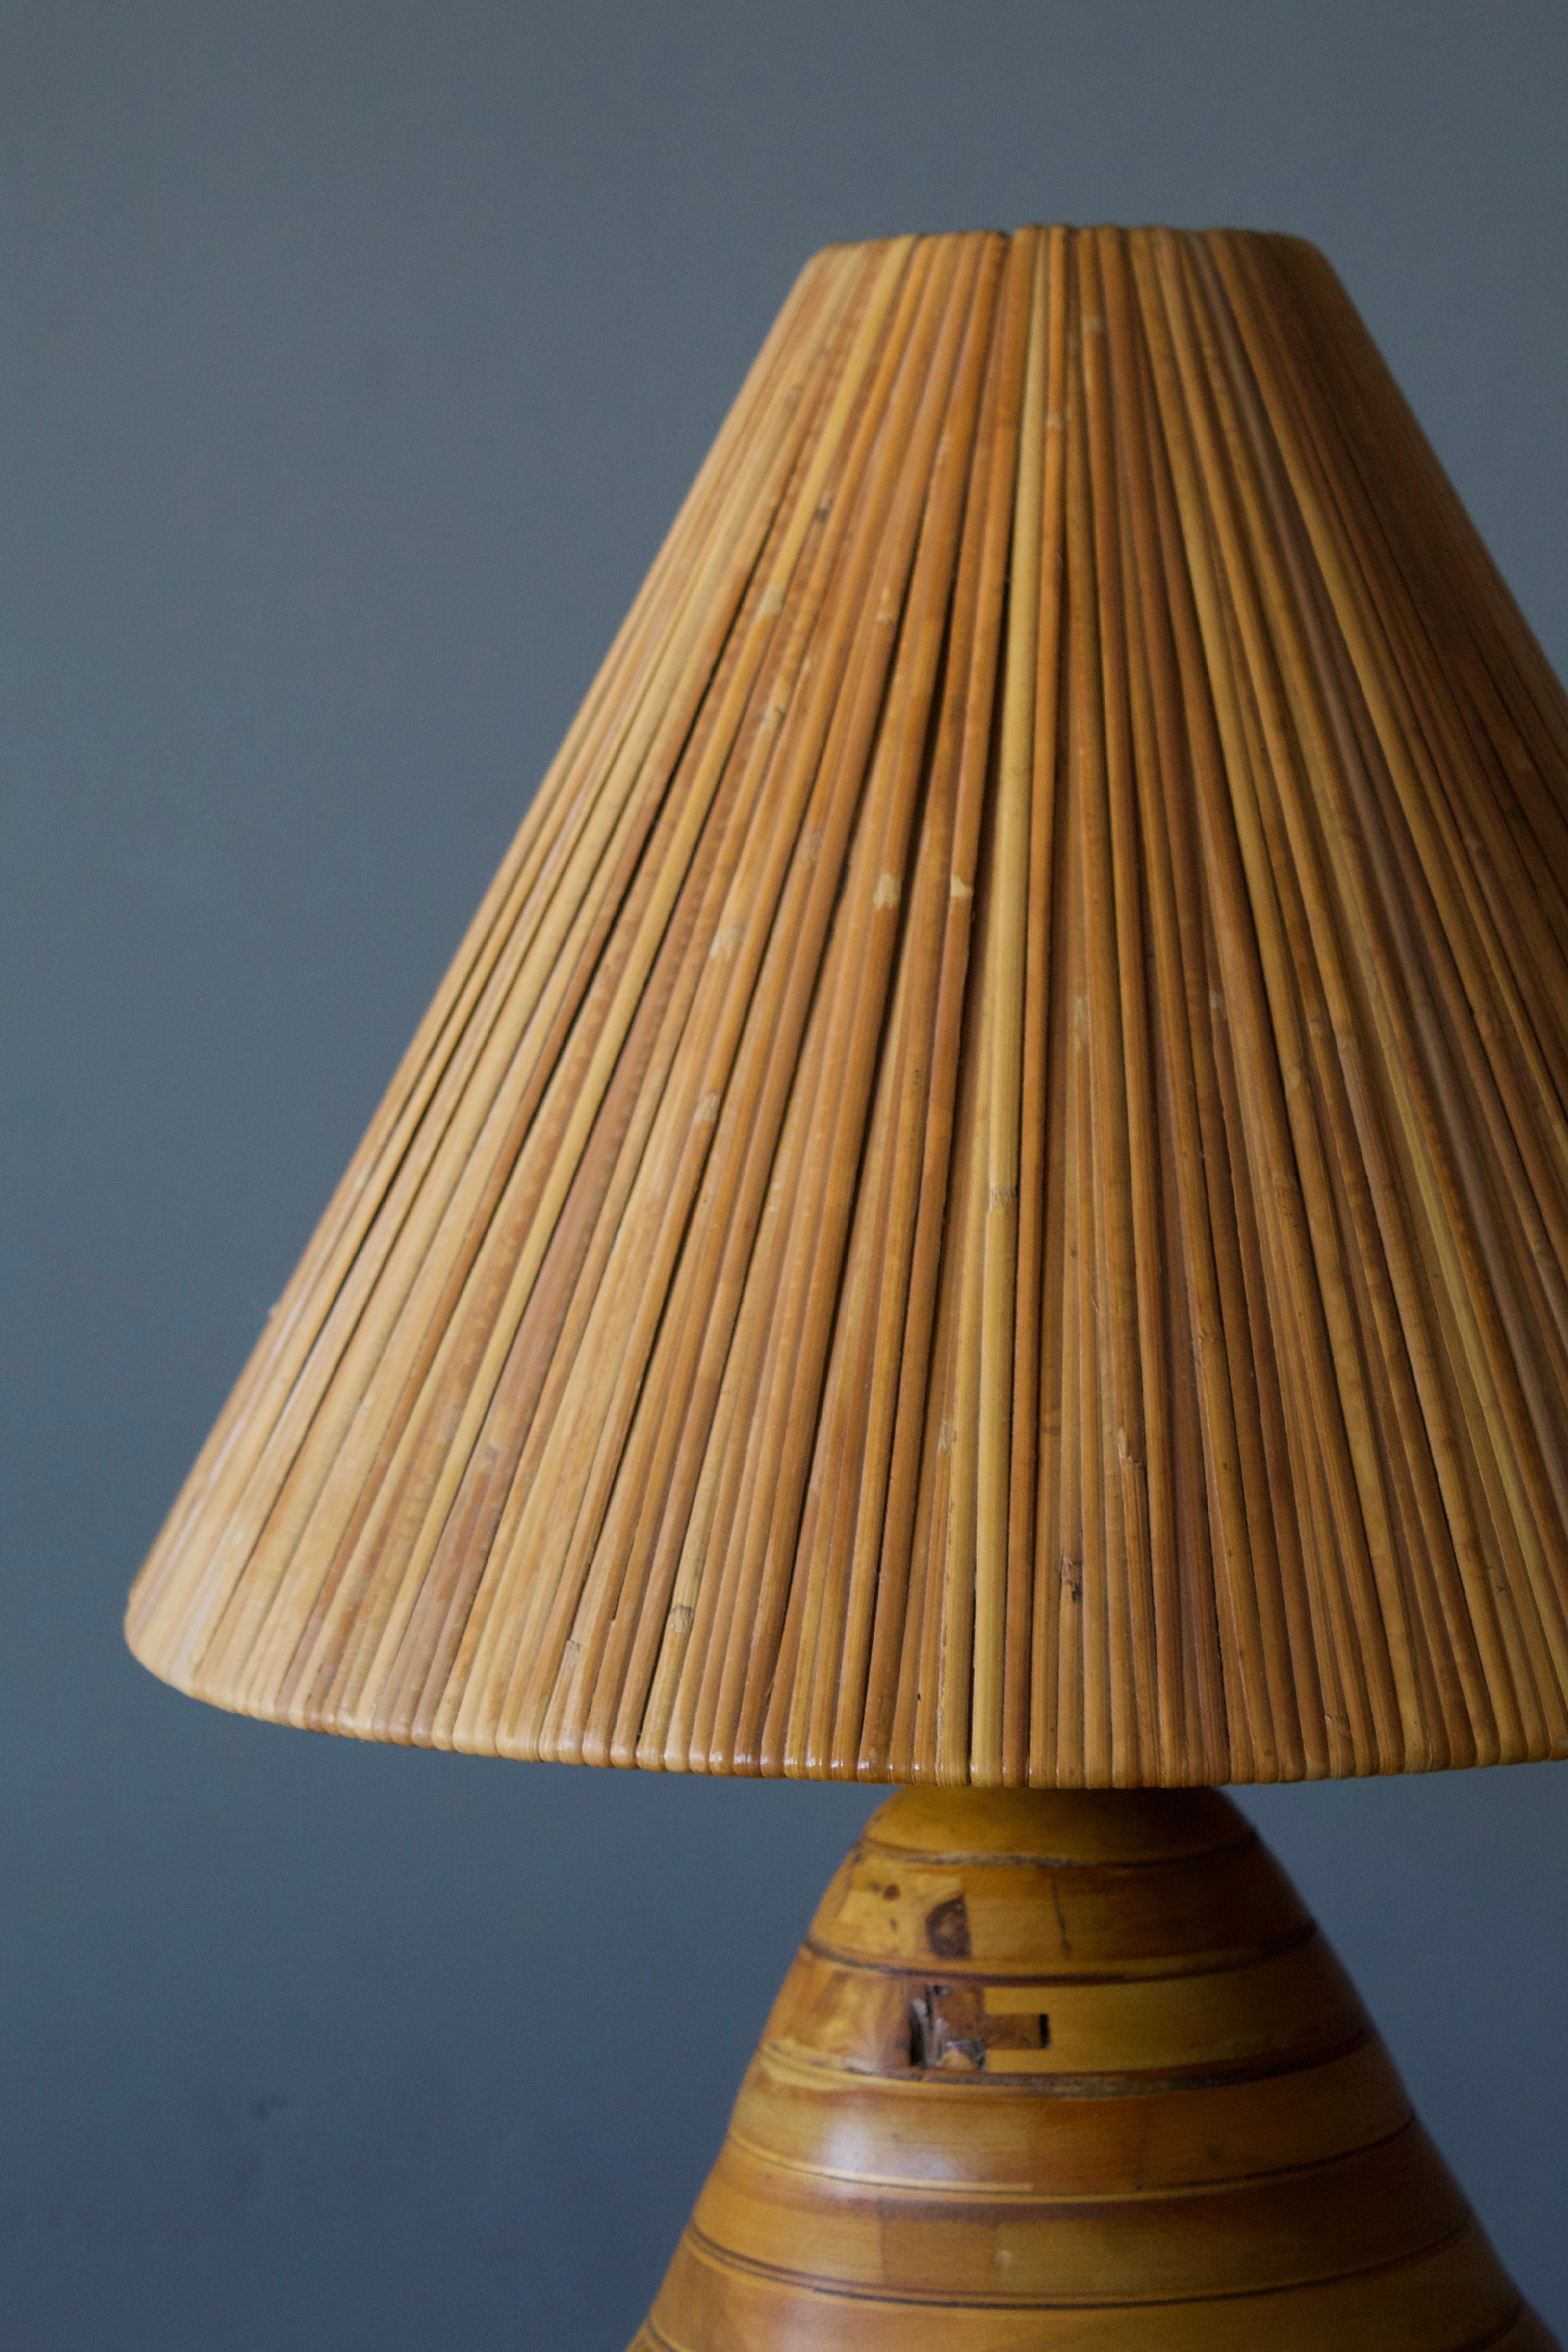 American Craft, Freeform Table Lamp, Oak, Brass, Rattan, America, 1960s In Good Condition For Sale In High Point, NC